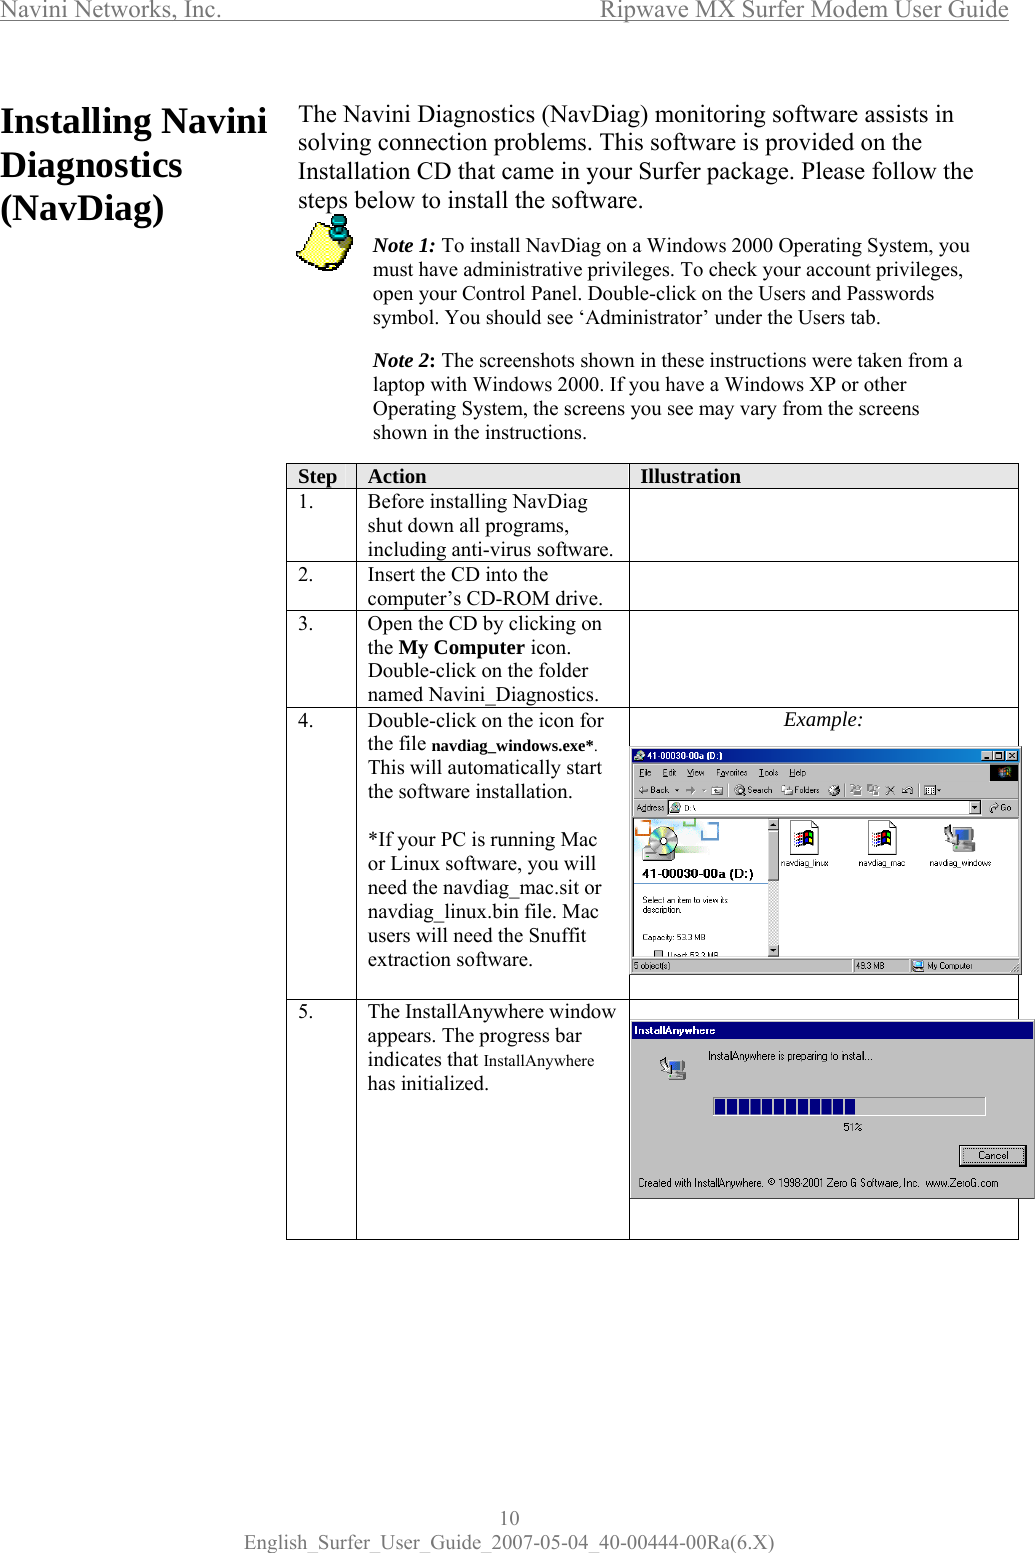 Navini Networks, Inc.      Ripwave MX Surfer Modem User Guide 10 English_Surfer_User_Guide_2007-05-04_40-00444-00Ra(6.X) Installing Navini Diagnostics (NavDiag)                          The Navini Diagnostics (NavDiag) monitoring software assists in solving connection problems. This software is provided on the Installation CD that came in your Surfer package. Please follow the steps below to install the software.              Note 1: To install NavDiag on a Windows 2000 Operating System, you   must have administrative privileges. To check your account privileges,   open your Control Panel. Double-click on the Users and Passwords   symbol. You should see ‘Administrator’ under the Users tab.             Note 2: The screenshots shown in these instructions were taken from a   laptop with Windows 2000. If you have a Windows XP or other   Operating System, the screens you see may vary from the screens   shown in the instructions.  Step  Action  Illustration 1.  Before installing NavDiag shut down all programs, including anti-virus software.  2.  Insert the CD into the computer’s CD-ROM drive.  3.  Open the CD by clicking on the My Computer icon. Double-click on the folder named Navini_Diagnostics.  4.  Double-click on the icon for the file navdiag_windows.exe*.  This will automatically start the software installation.  *If your PC is running Mac or Linux software, you will need the navdiag_mac.sit or navdiag_linux.bin file. Mac users will need the Snuffit extraction software. Example:  5.  The InstallAnywhere window appears. The progress bar indicates that InstallAnywhere has initialized.         